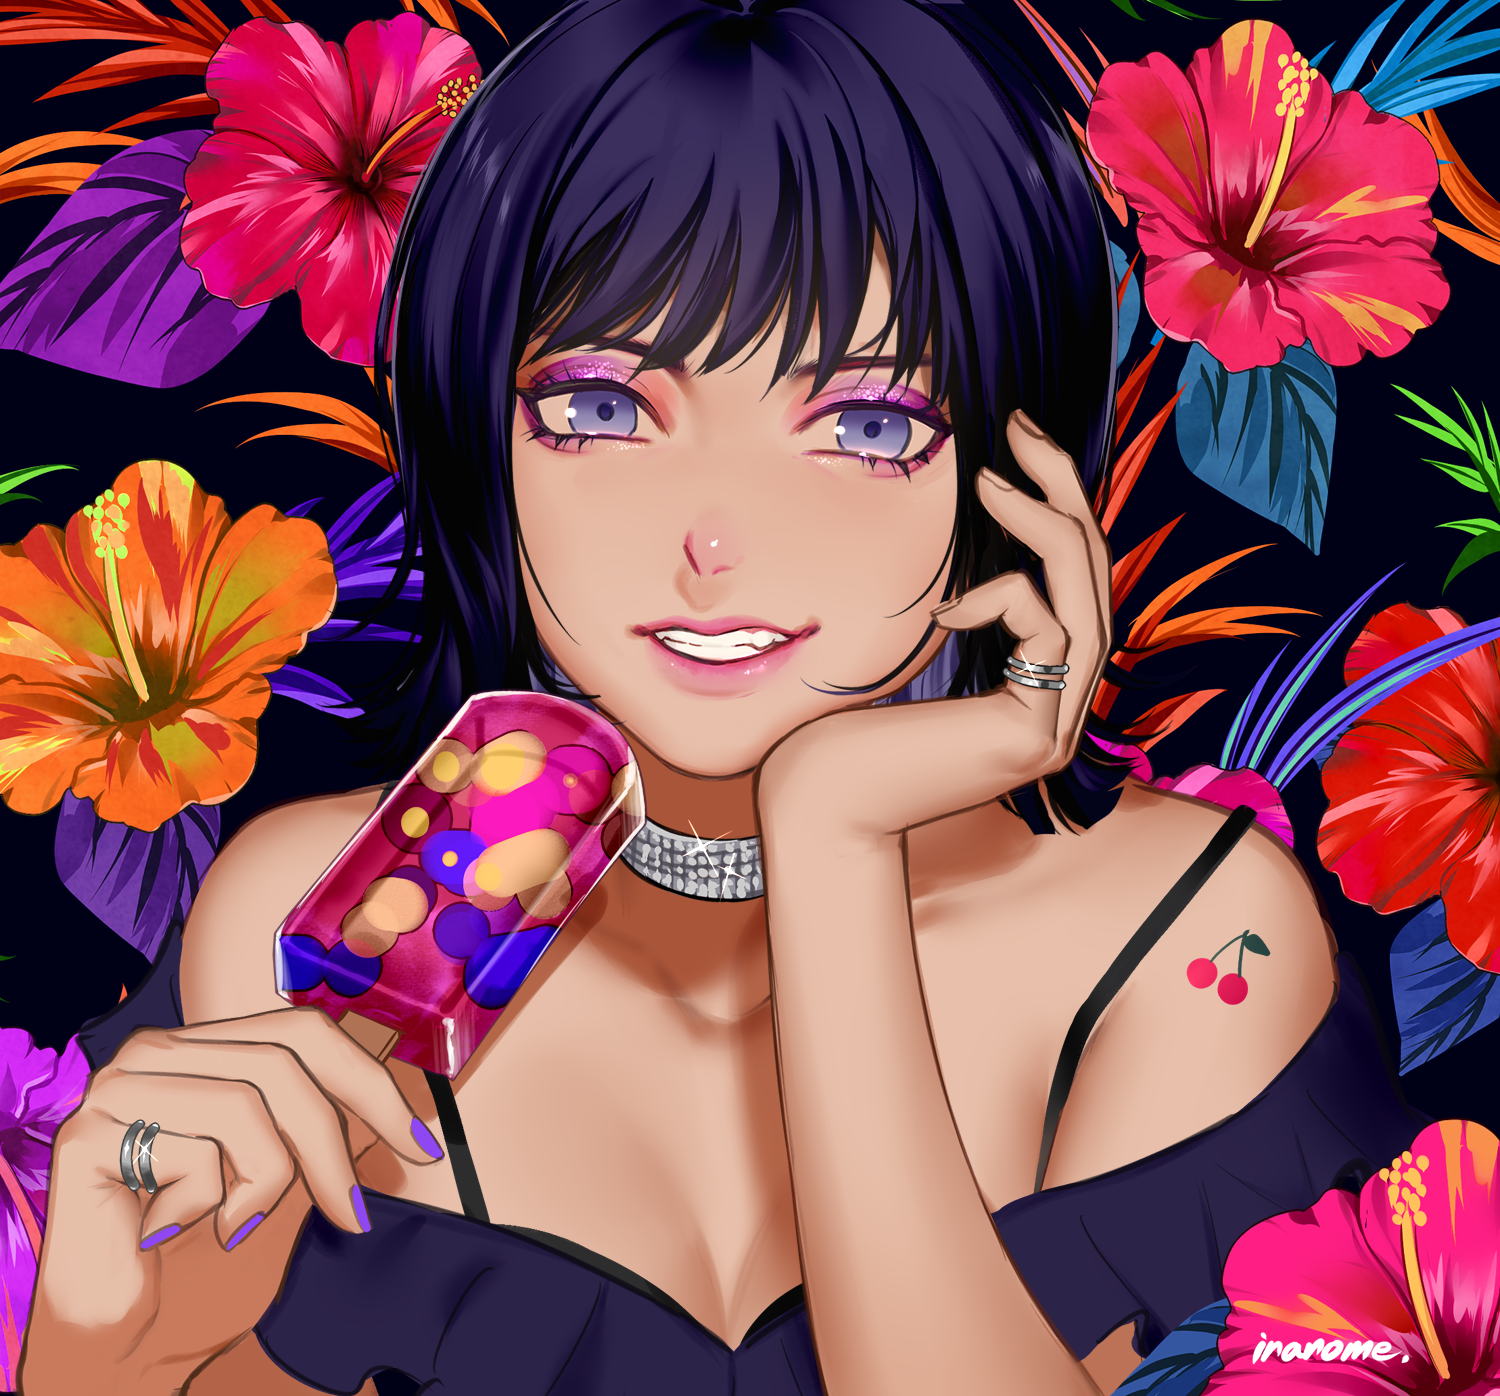 Anime Anime Girls Ice Cream Necklace Rings Flowers Smiling Dress Purple Nails Short Hair Violet Eyes 1500x1396